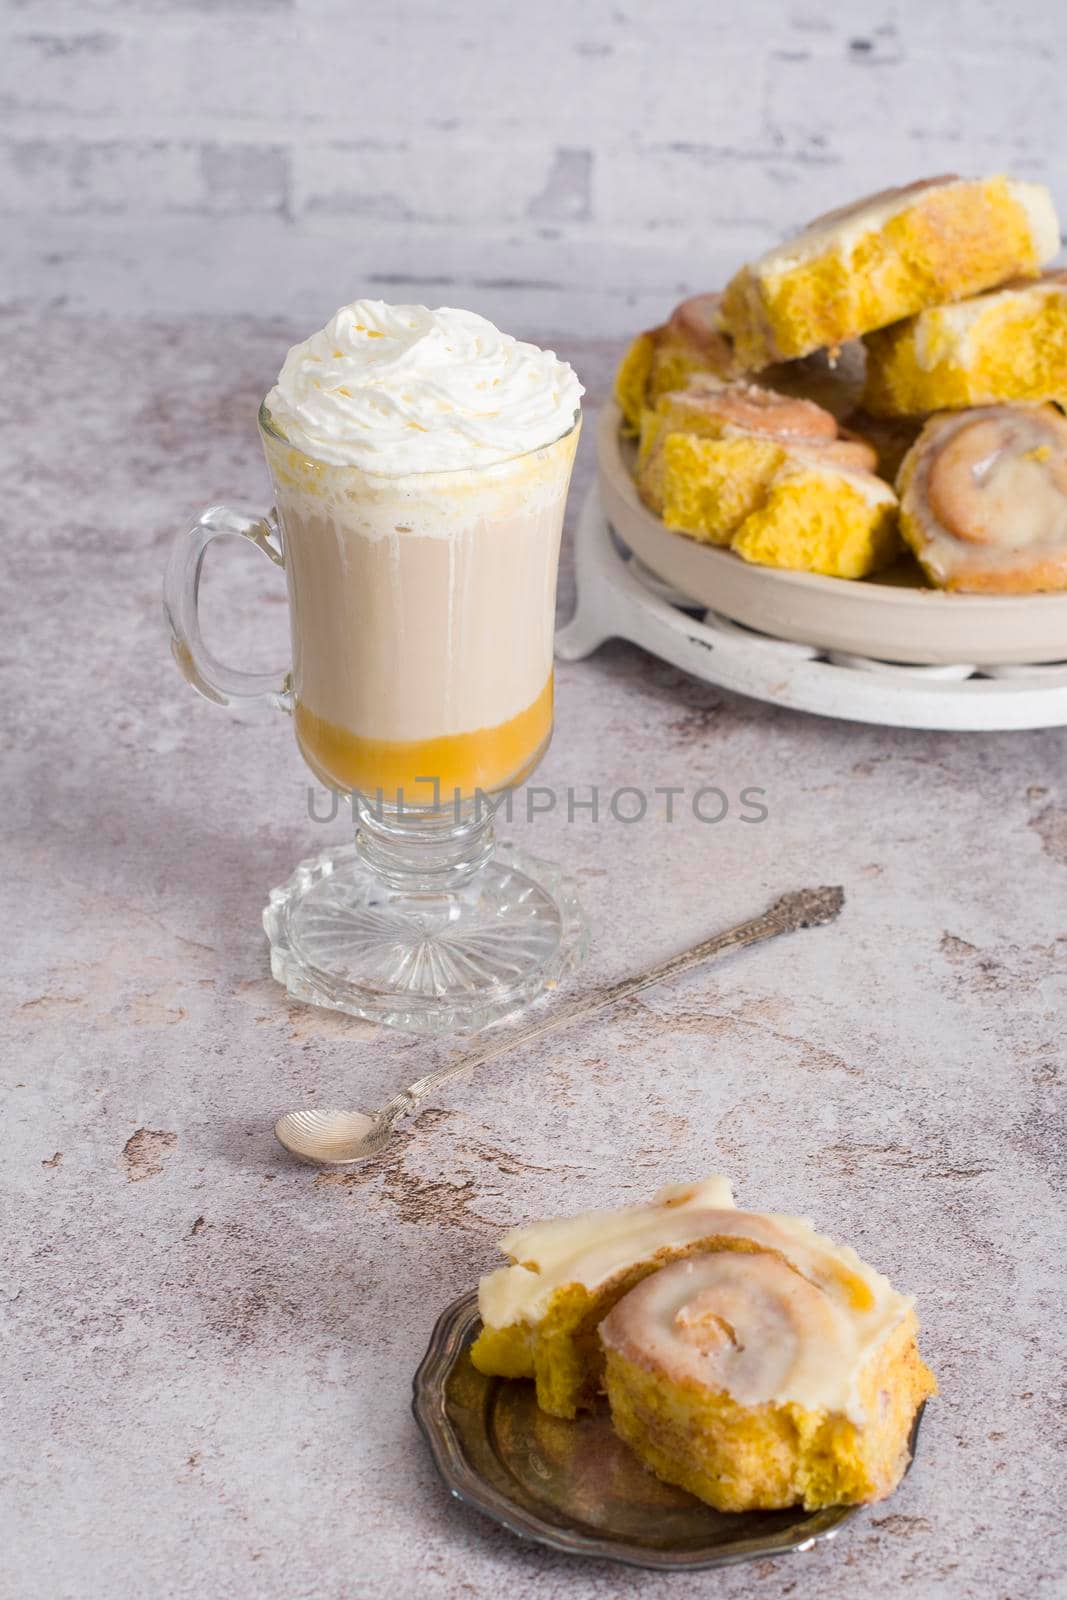 pumpkin cinnabons and latte for dessert, holiday table with pastries, home sweet by KaterinaDalemans